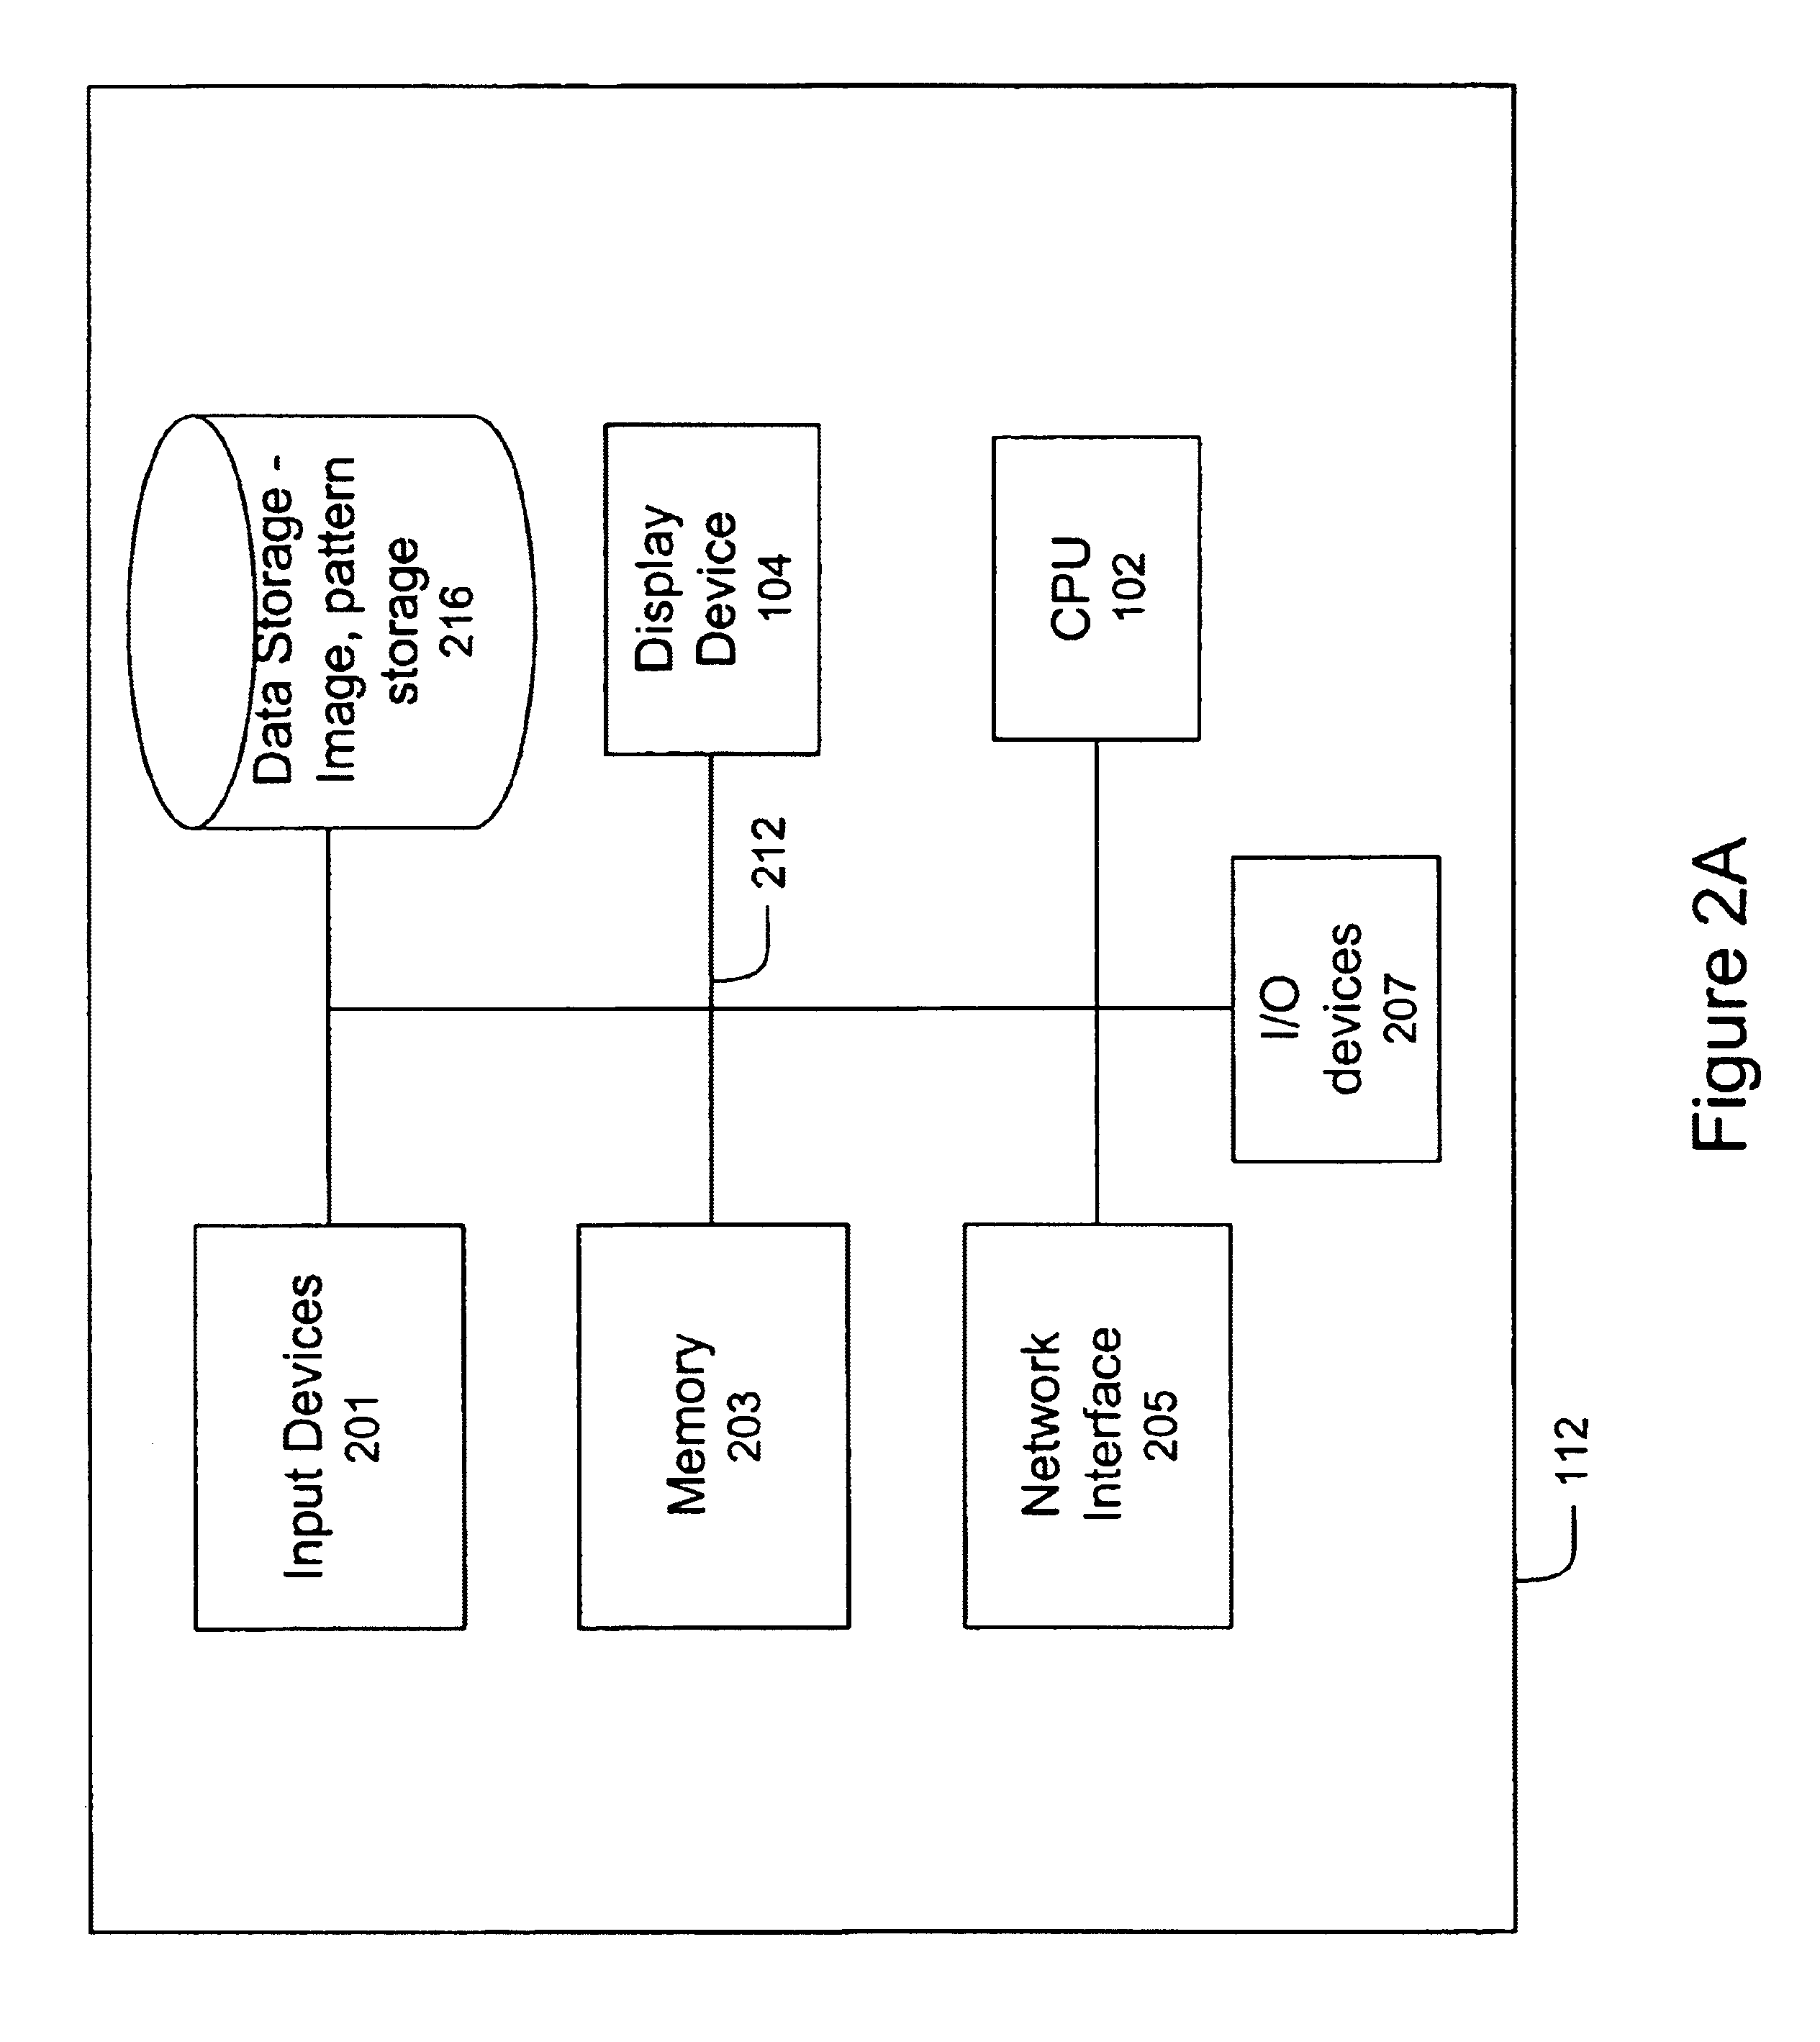 Method and apparatus for simulating the appearance of paving stone on an existing driveway